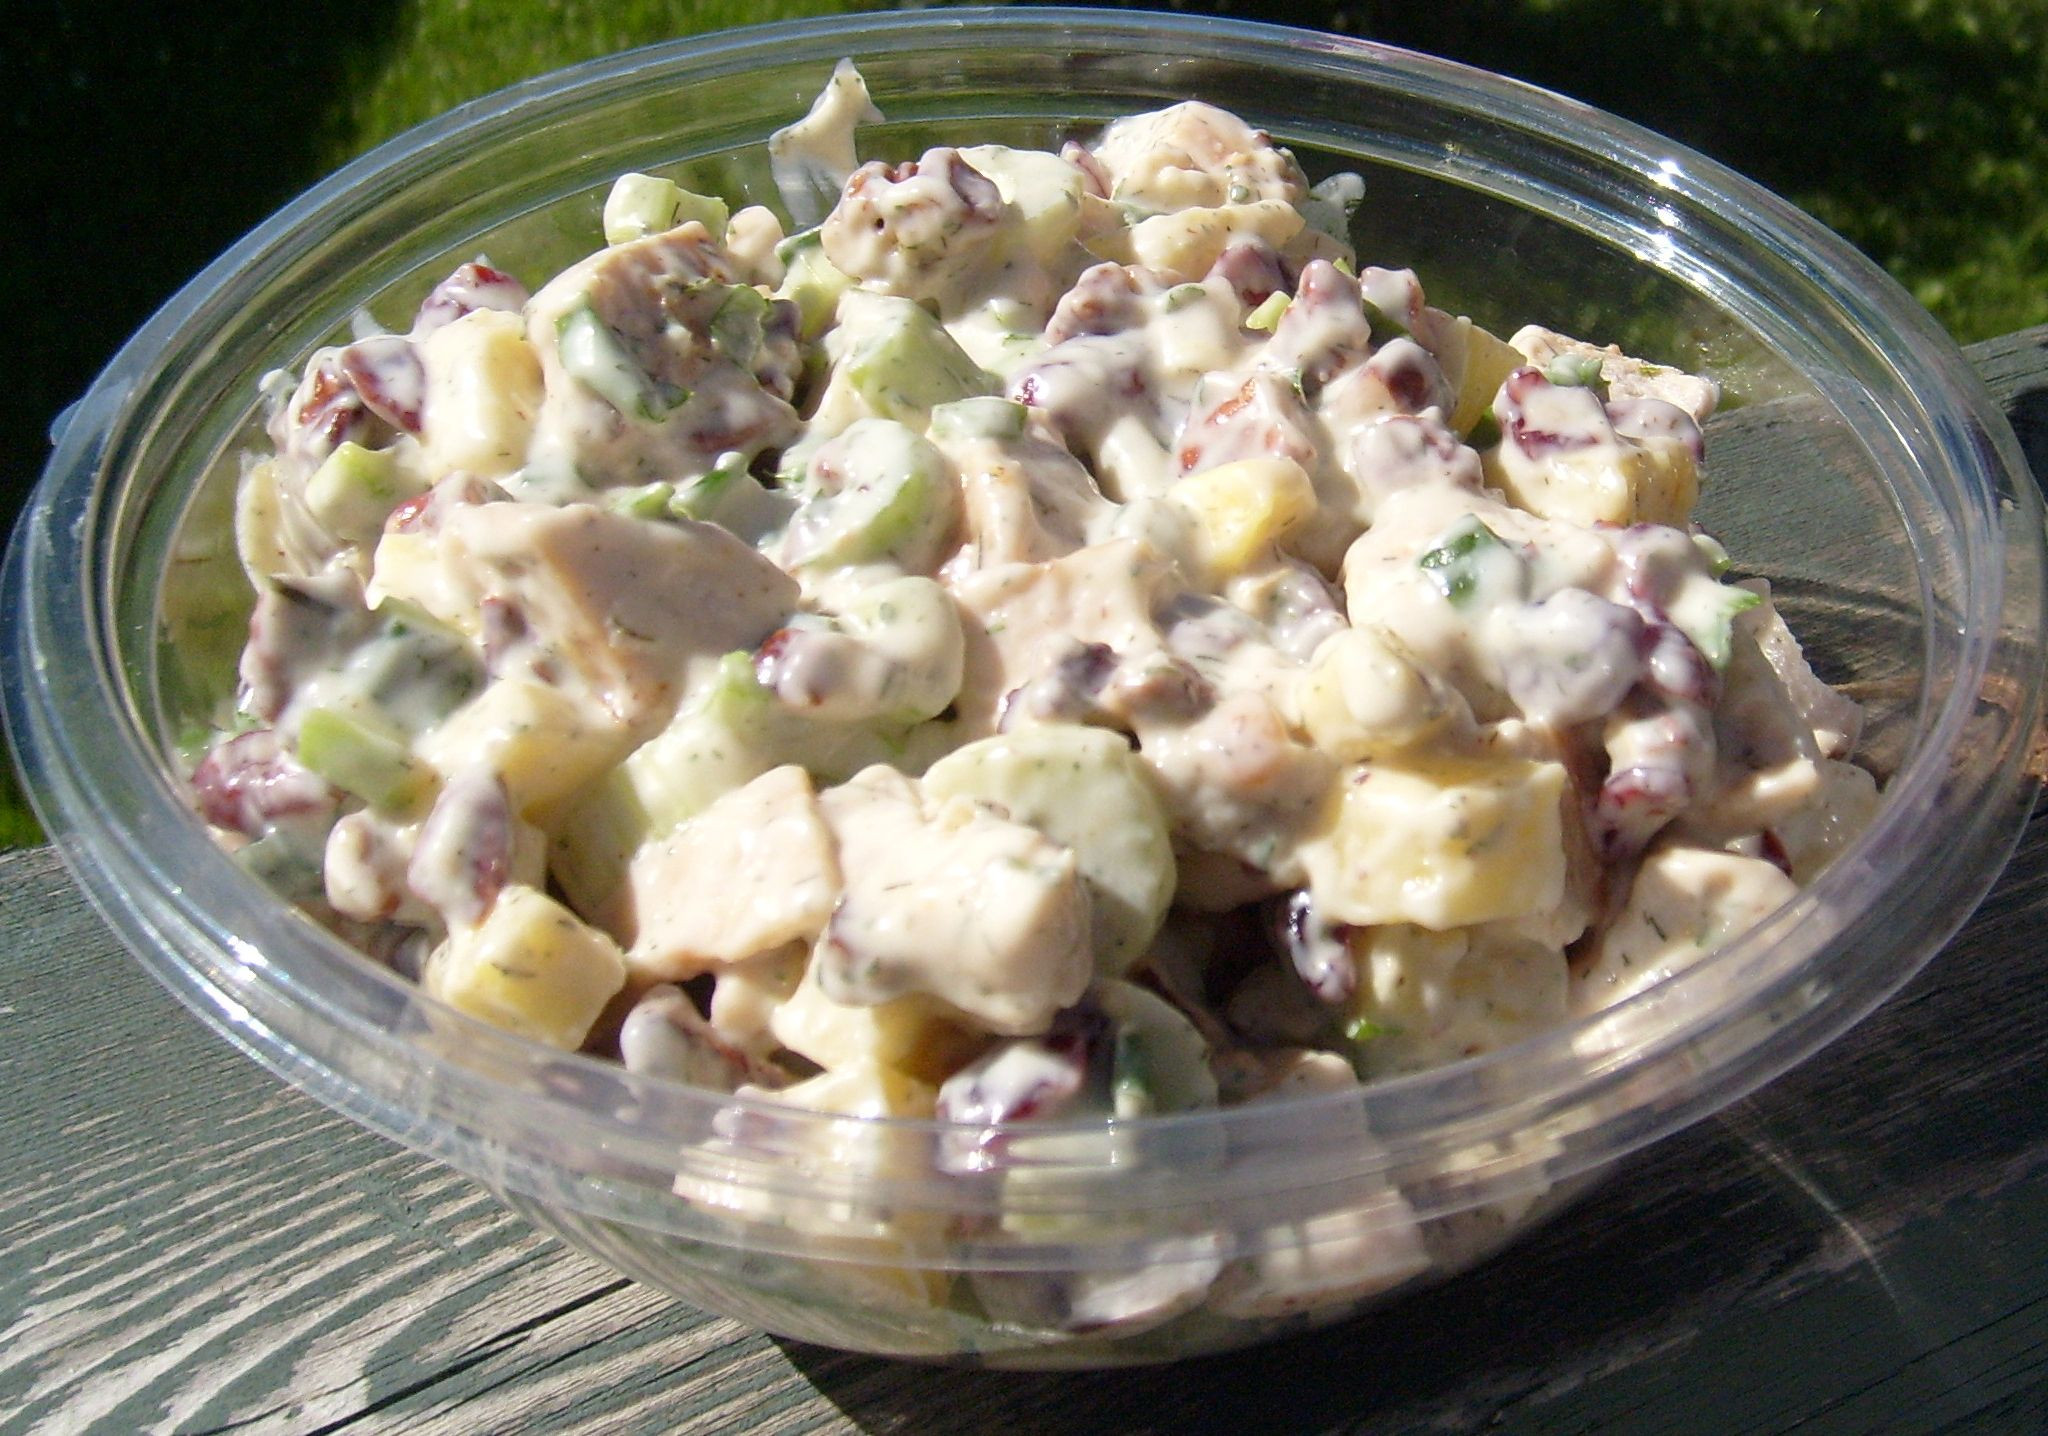 Old Fashioned Chicken Salad Inspirational Old Fashioned Chicken Salad Of Old Fashioned Chicken Salad 1 